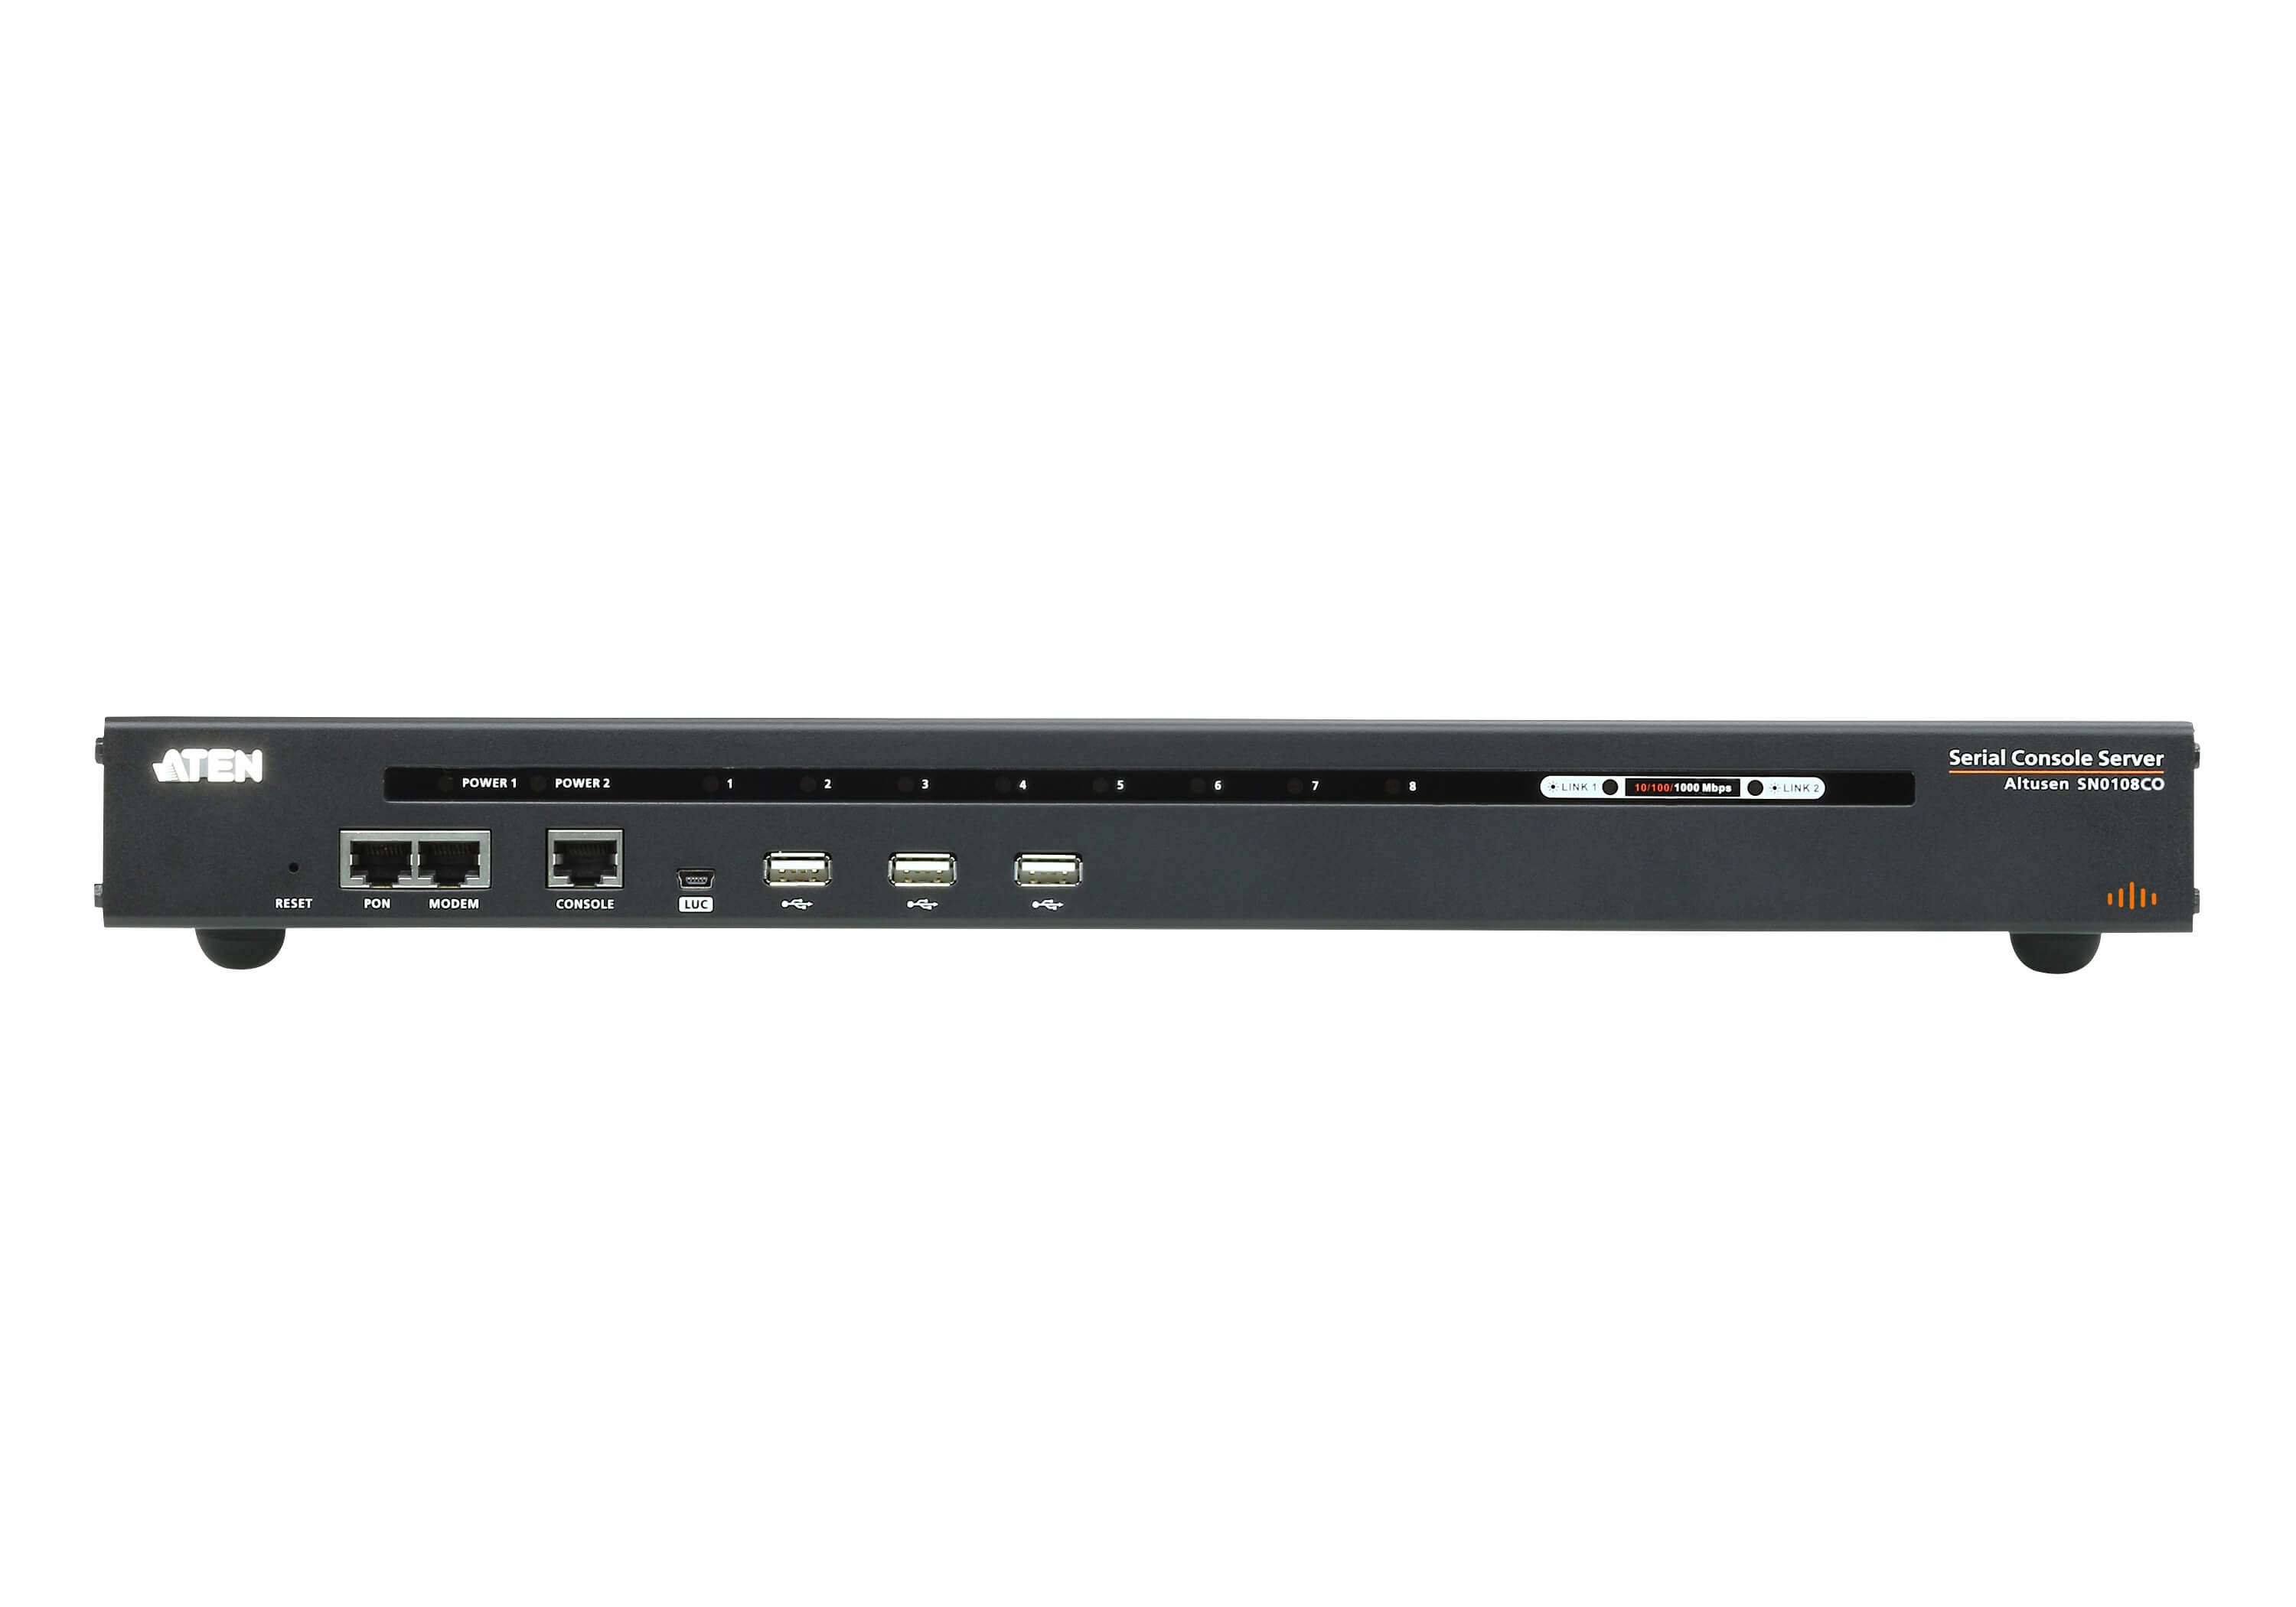 SN0108CO  8-Port Serial Console Server with Cisco Support, auto-sensing DTE/DCE, USB Storage Support and Power/LAN Redundancy